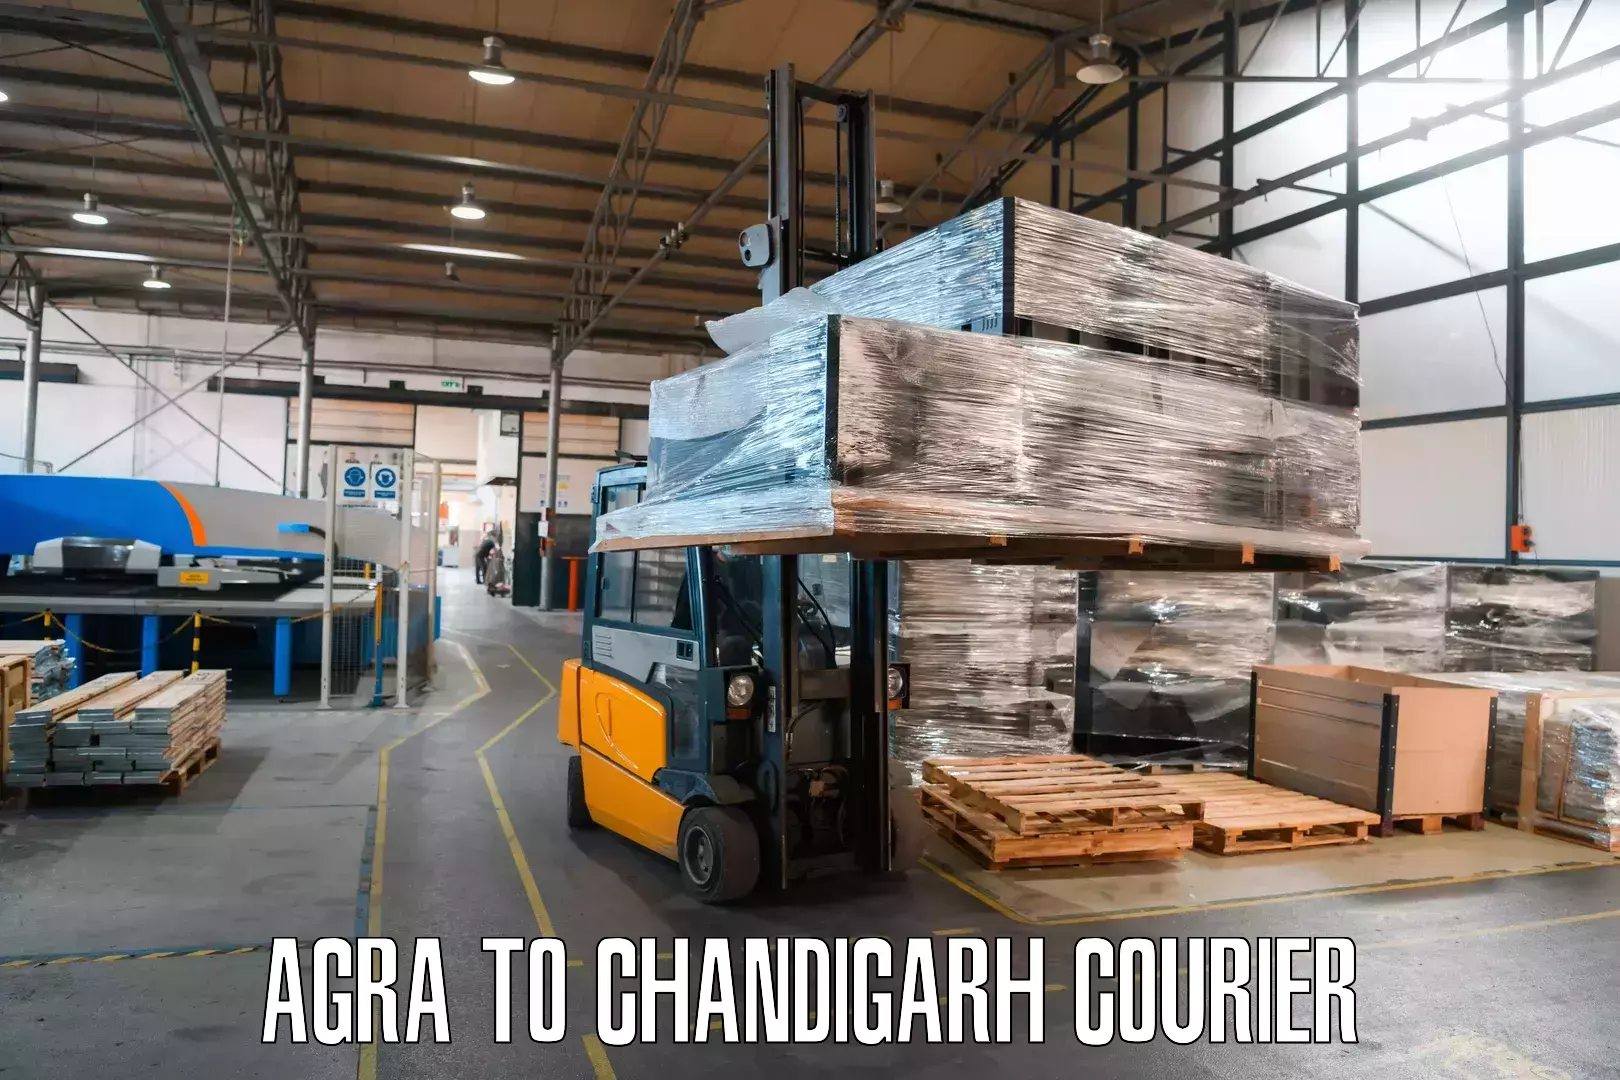 Scheduled delivery Agra to Chandigarh